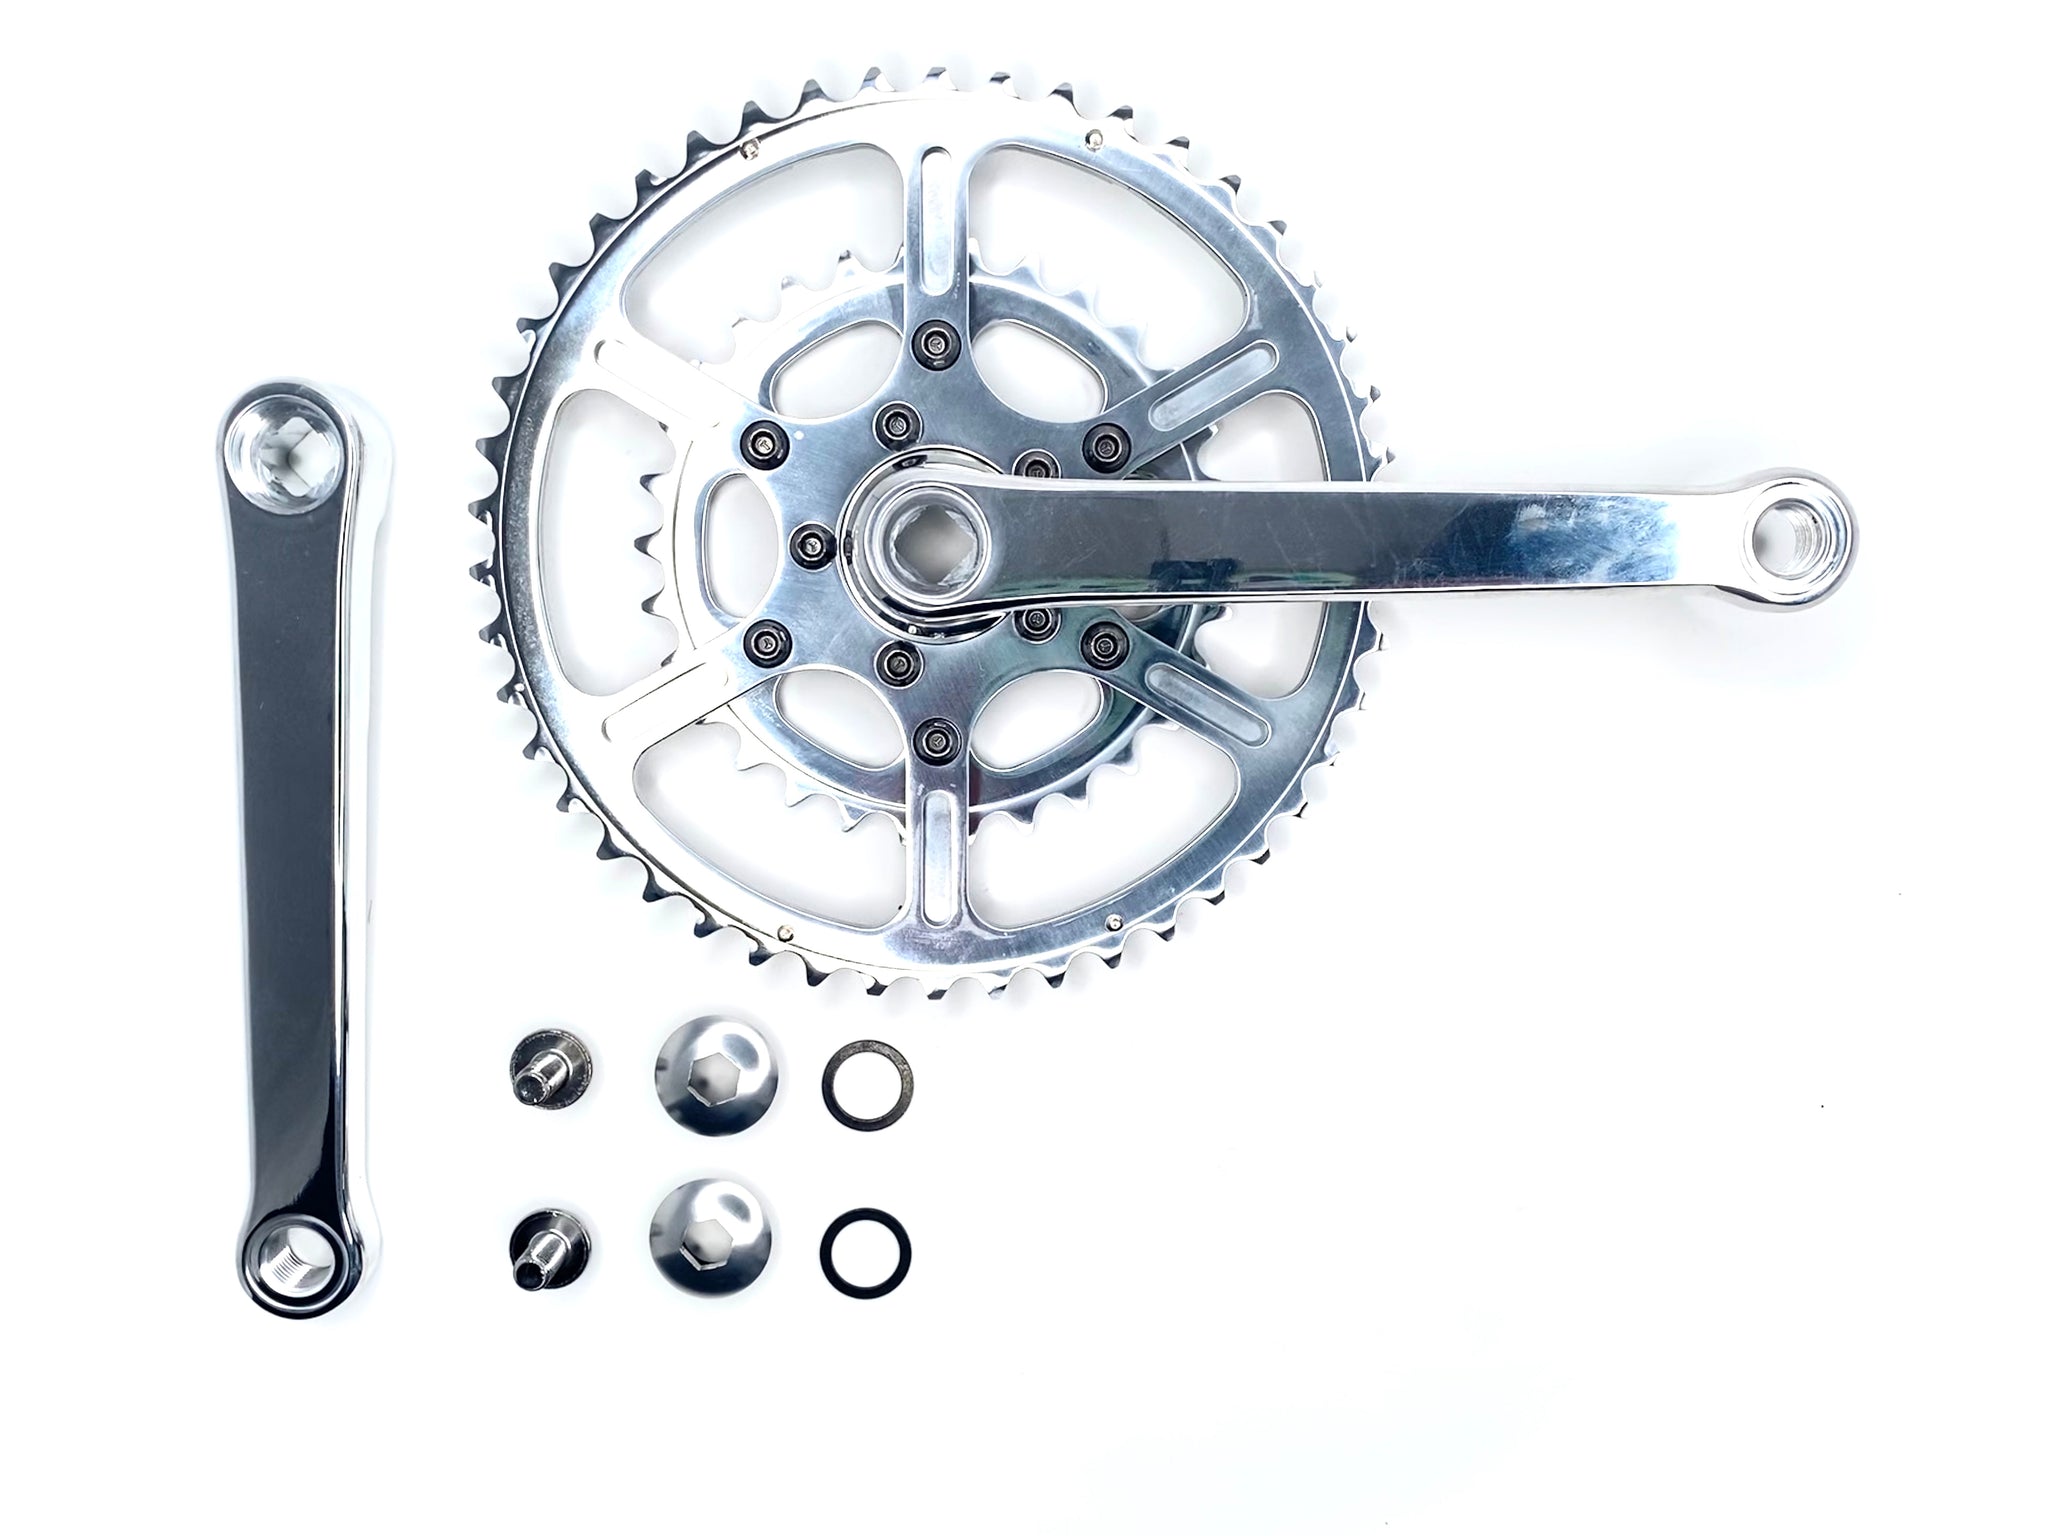 Luxe 46T/30T 50.4 BCD Double Ring Crankset